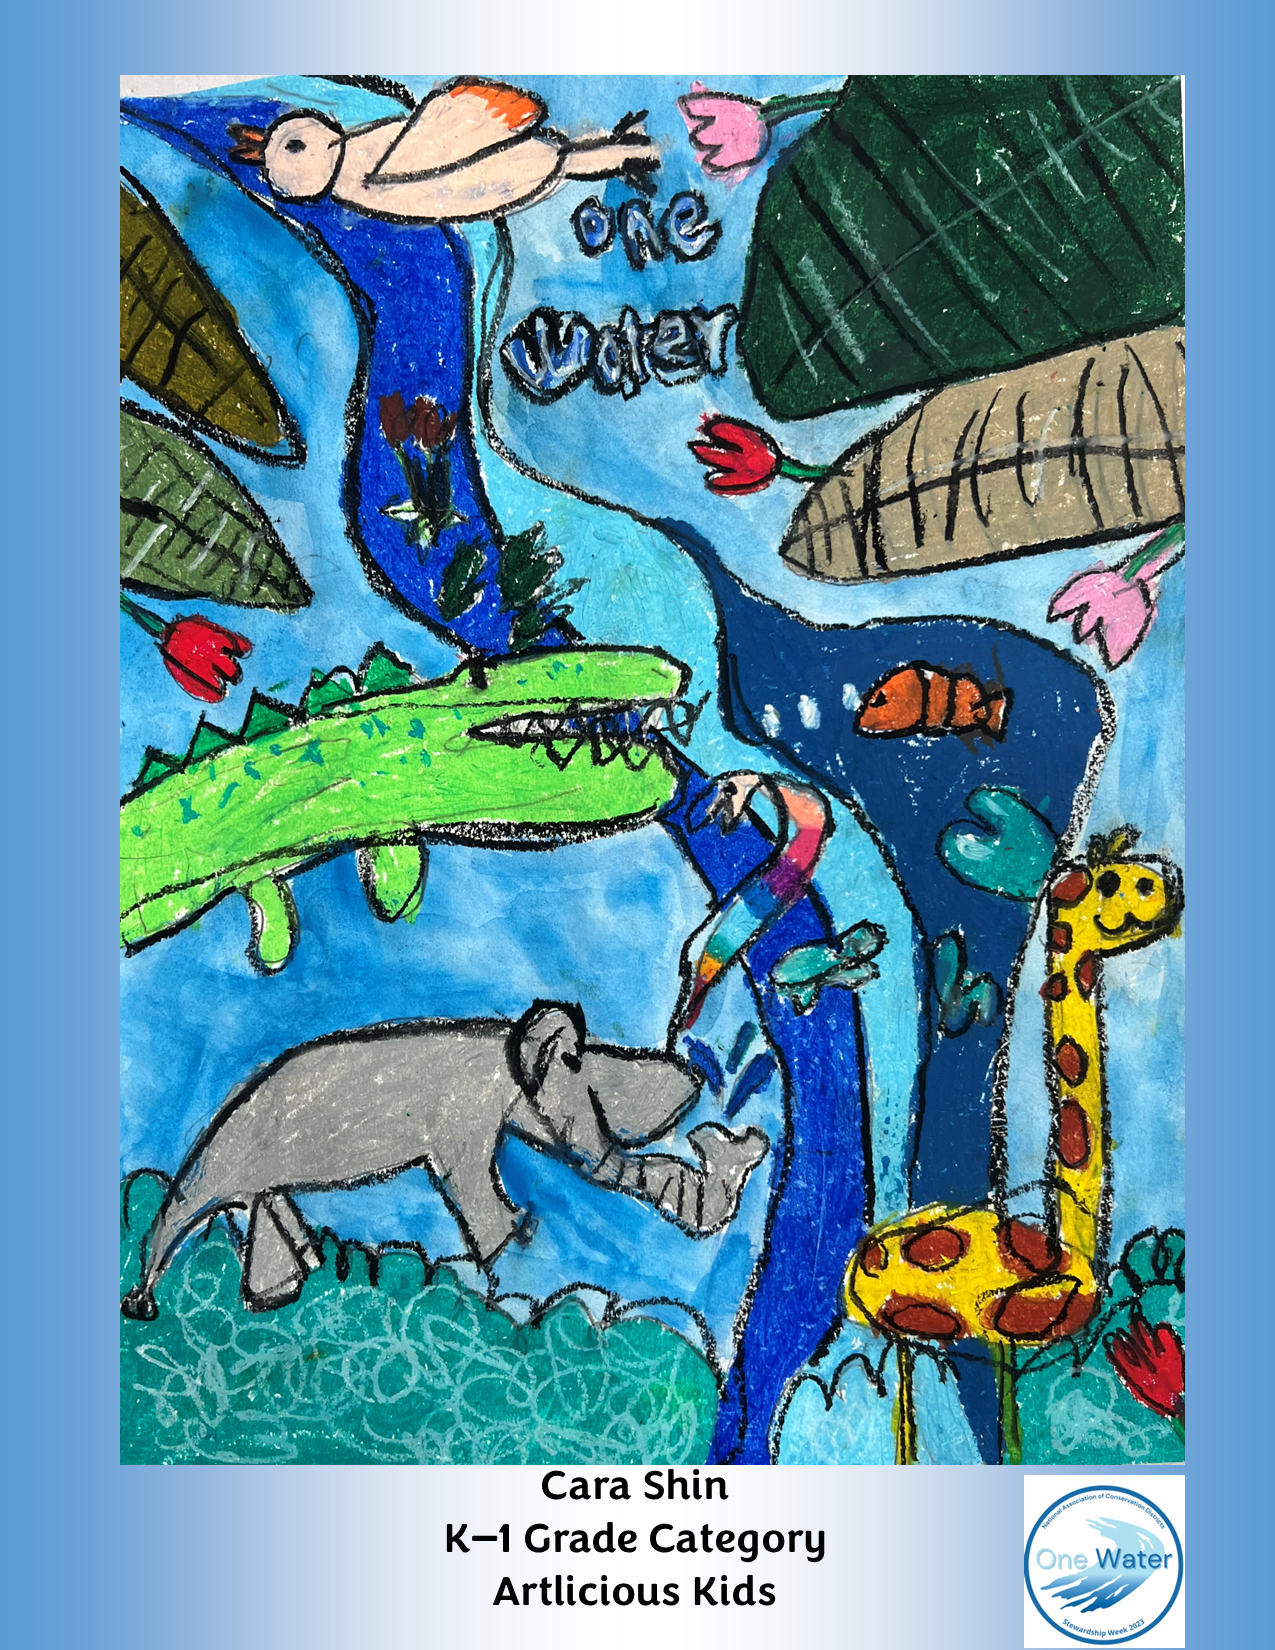 conservation of wildlife poster for kids